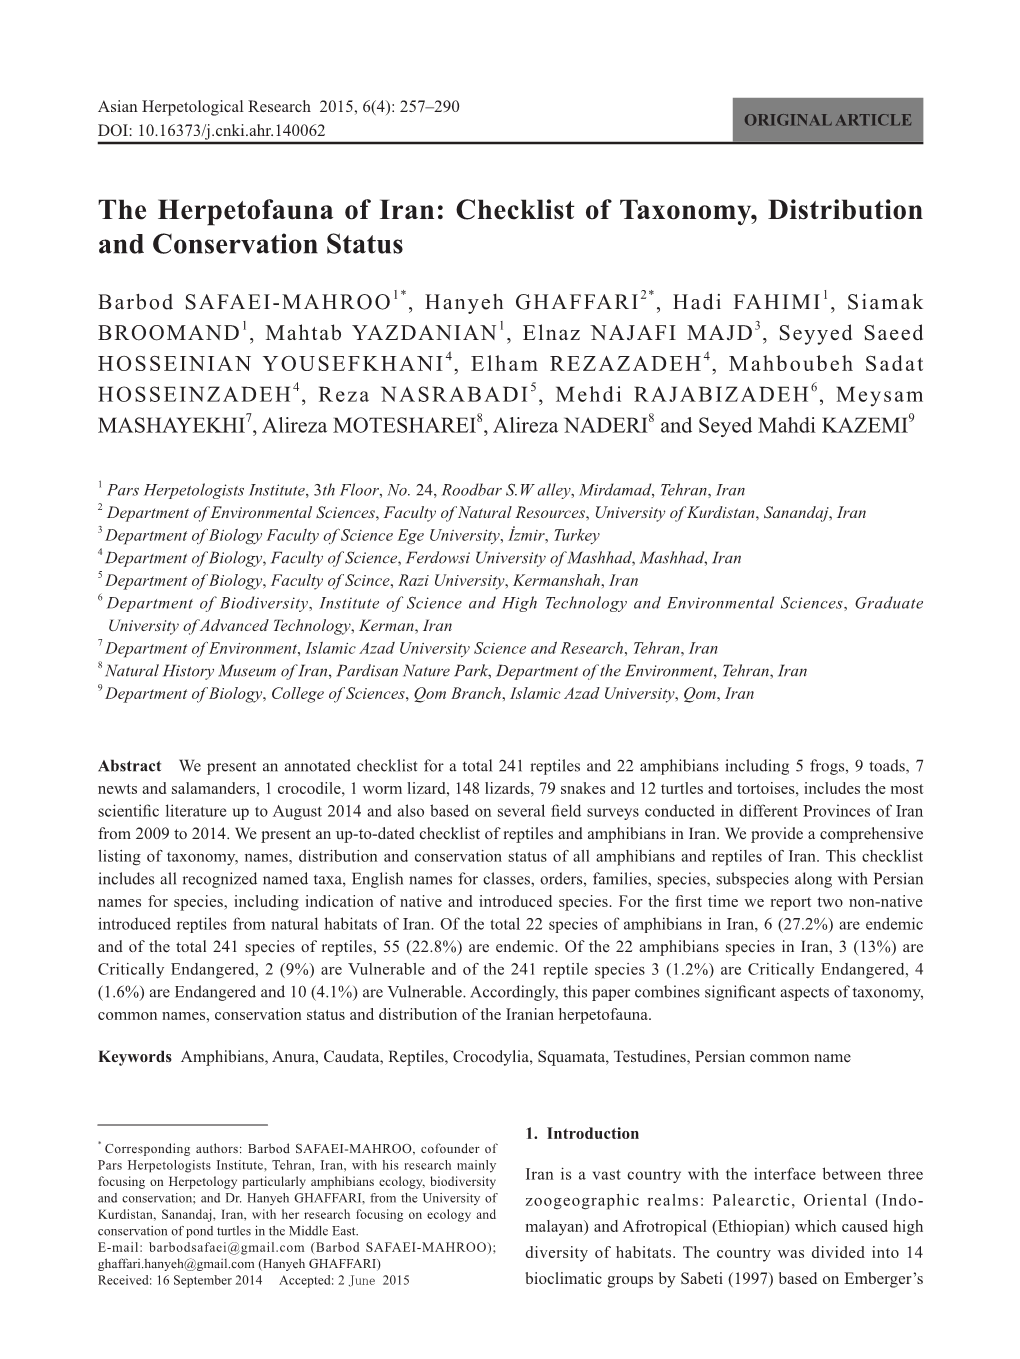 The Herpetofauna of Iran: Checklist of Taxonomy, Distribution and Conservation Status